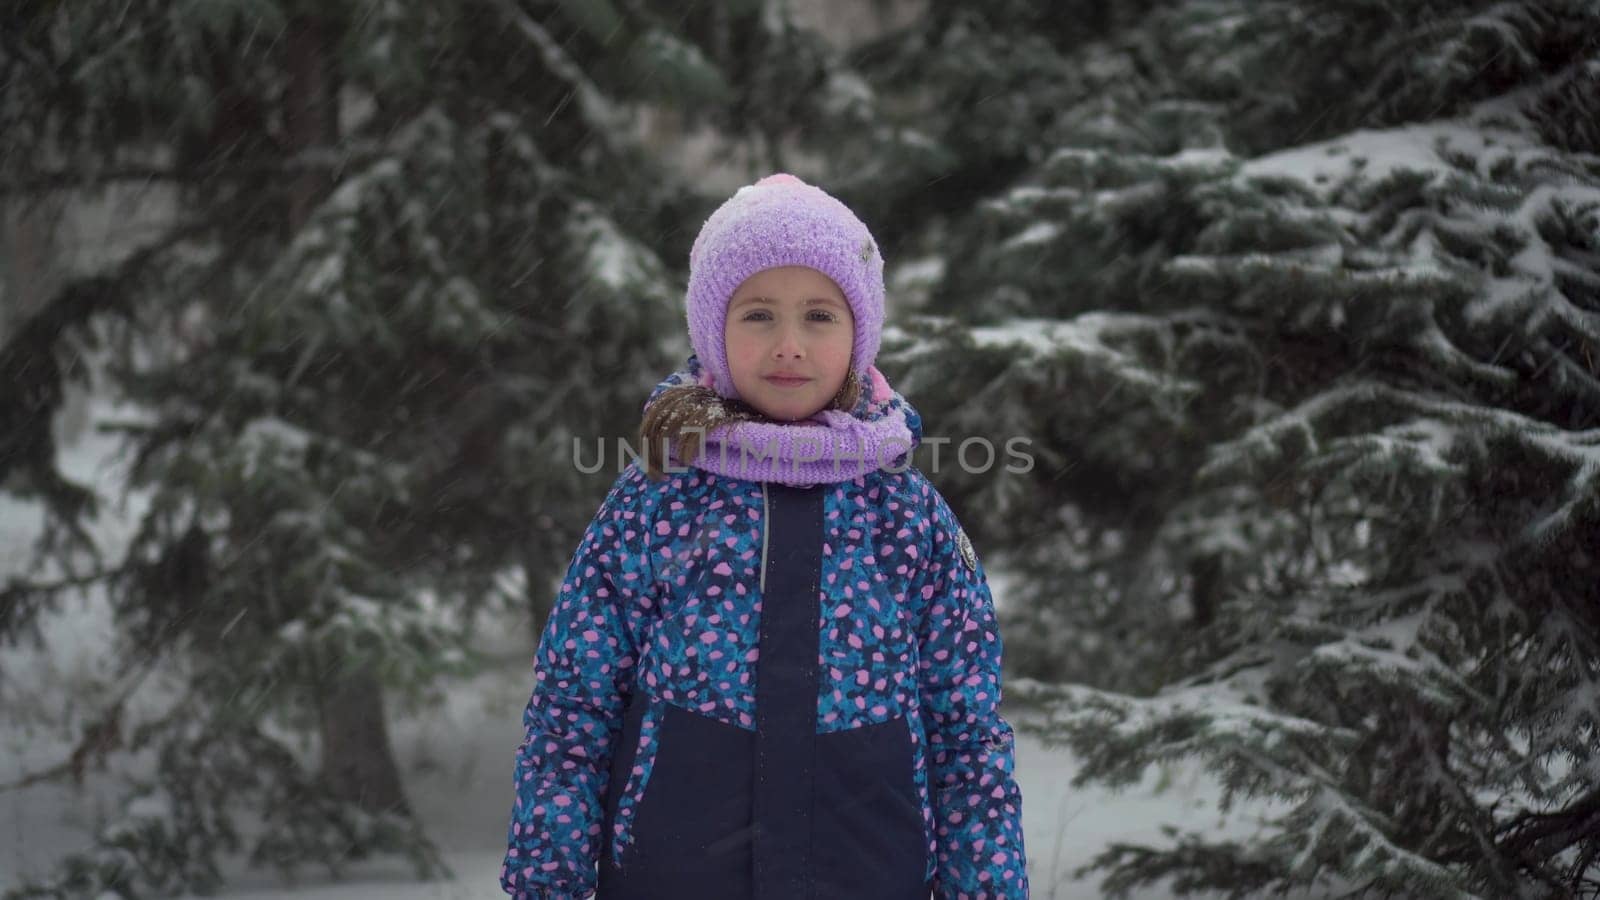 A girl stands against a background of fir trees under snowfall and looks at the camera. A girl in a jacket and hat stands under heavy snowfall. by Puzankov